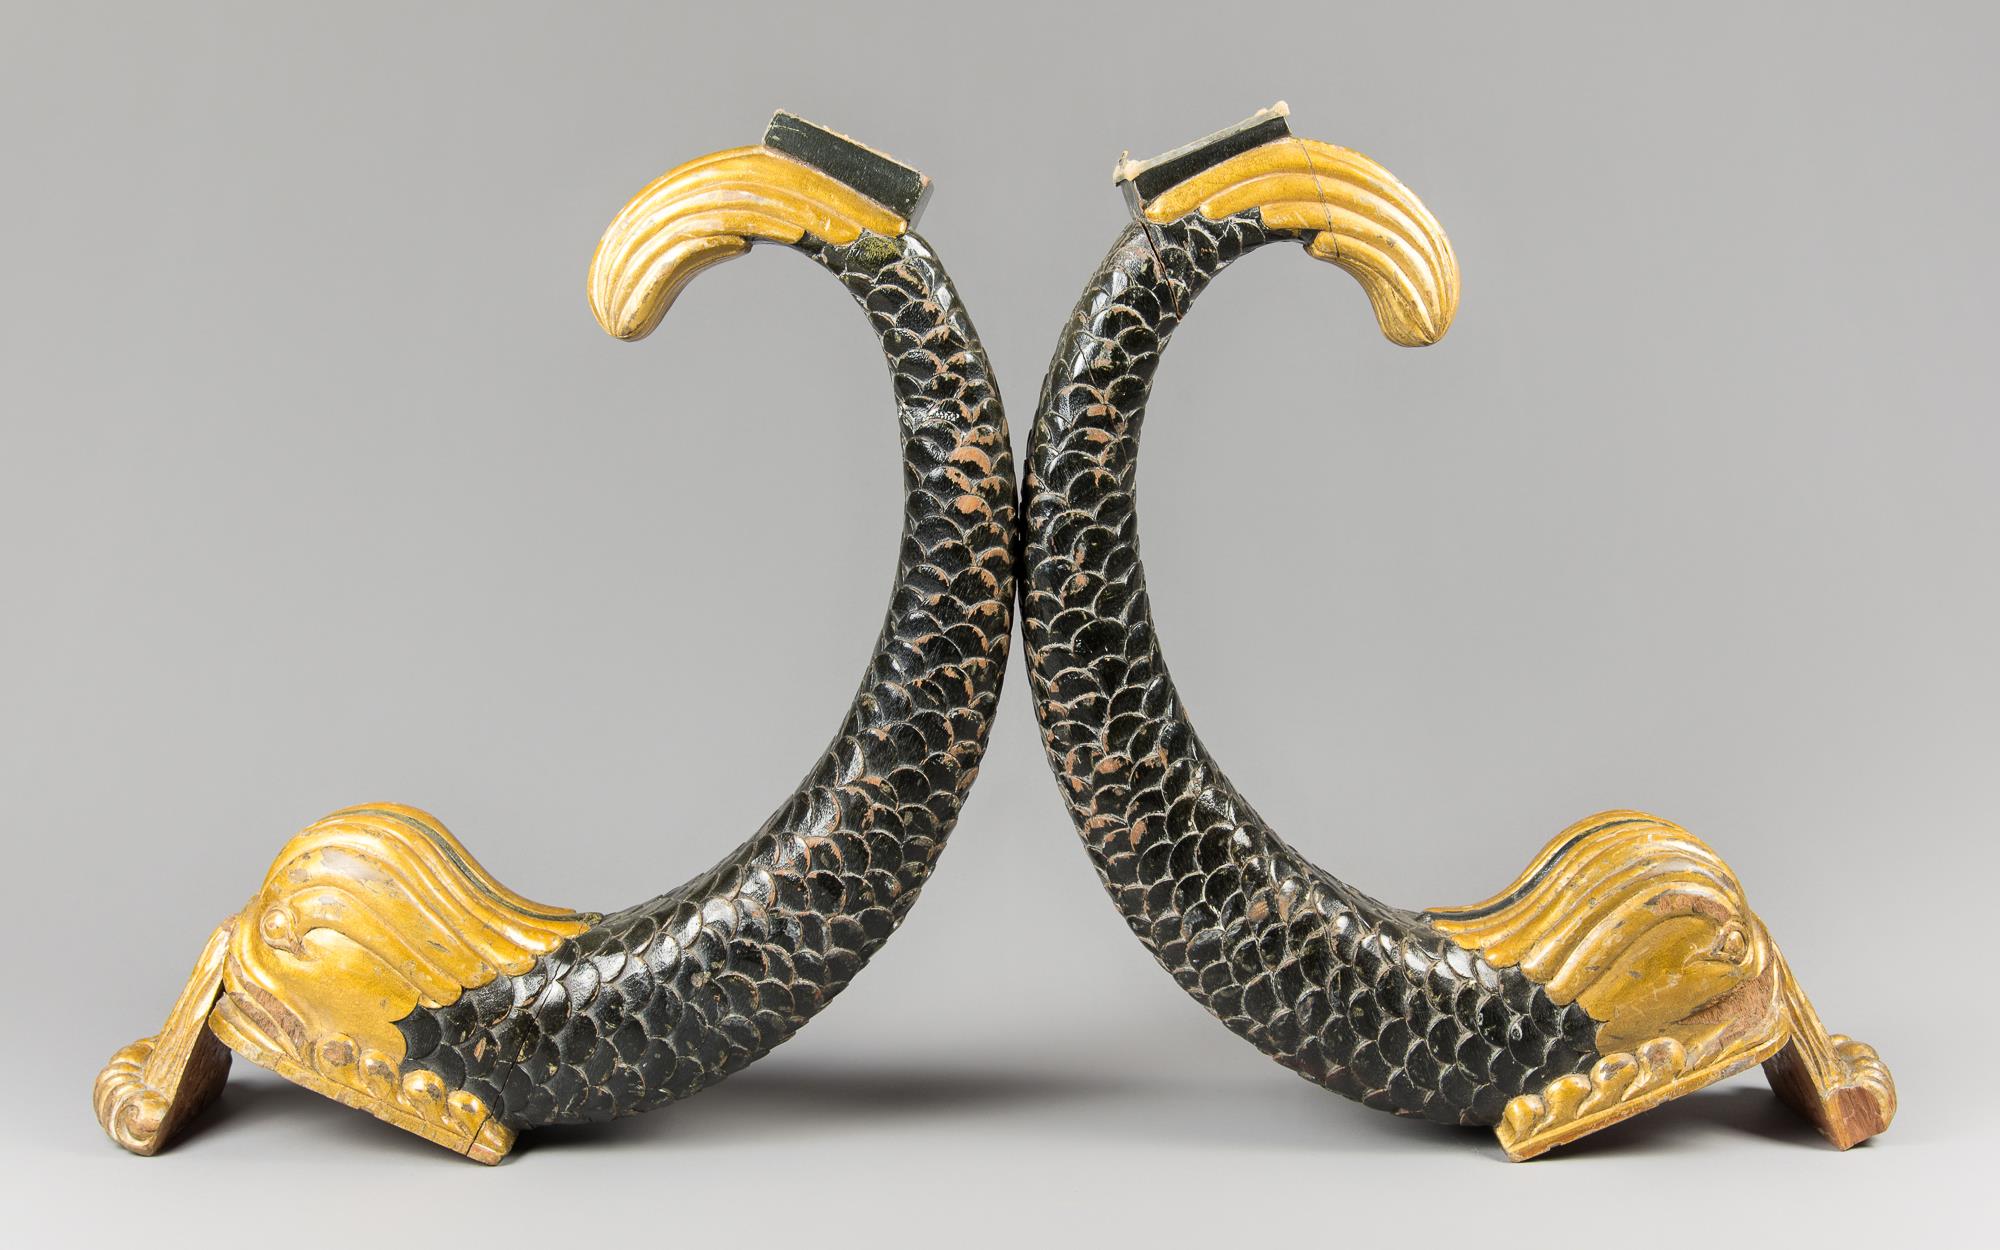 A PAIR OF LATE 19TH/EARLY 20TH CENTURY EMPIRE STYLE CARVED WOOD DOLPHIN ARCHITECTURAL FRAGMENTS,